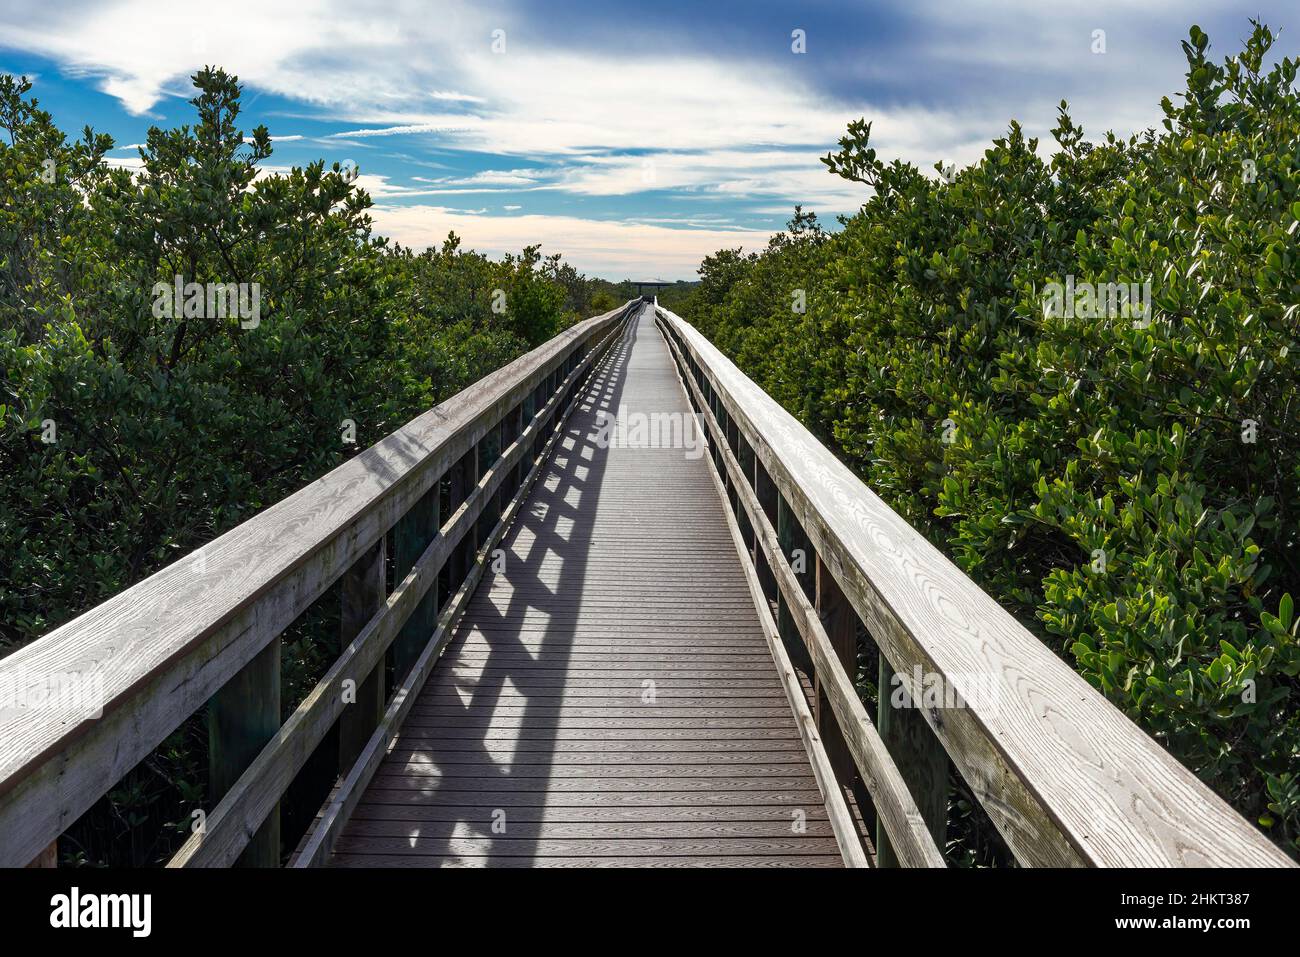 A long wooden raised walkway cuts through a sea of black mangroves in the Ponce Inlet Nature Preserve, Florida Stock Photo